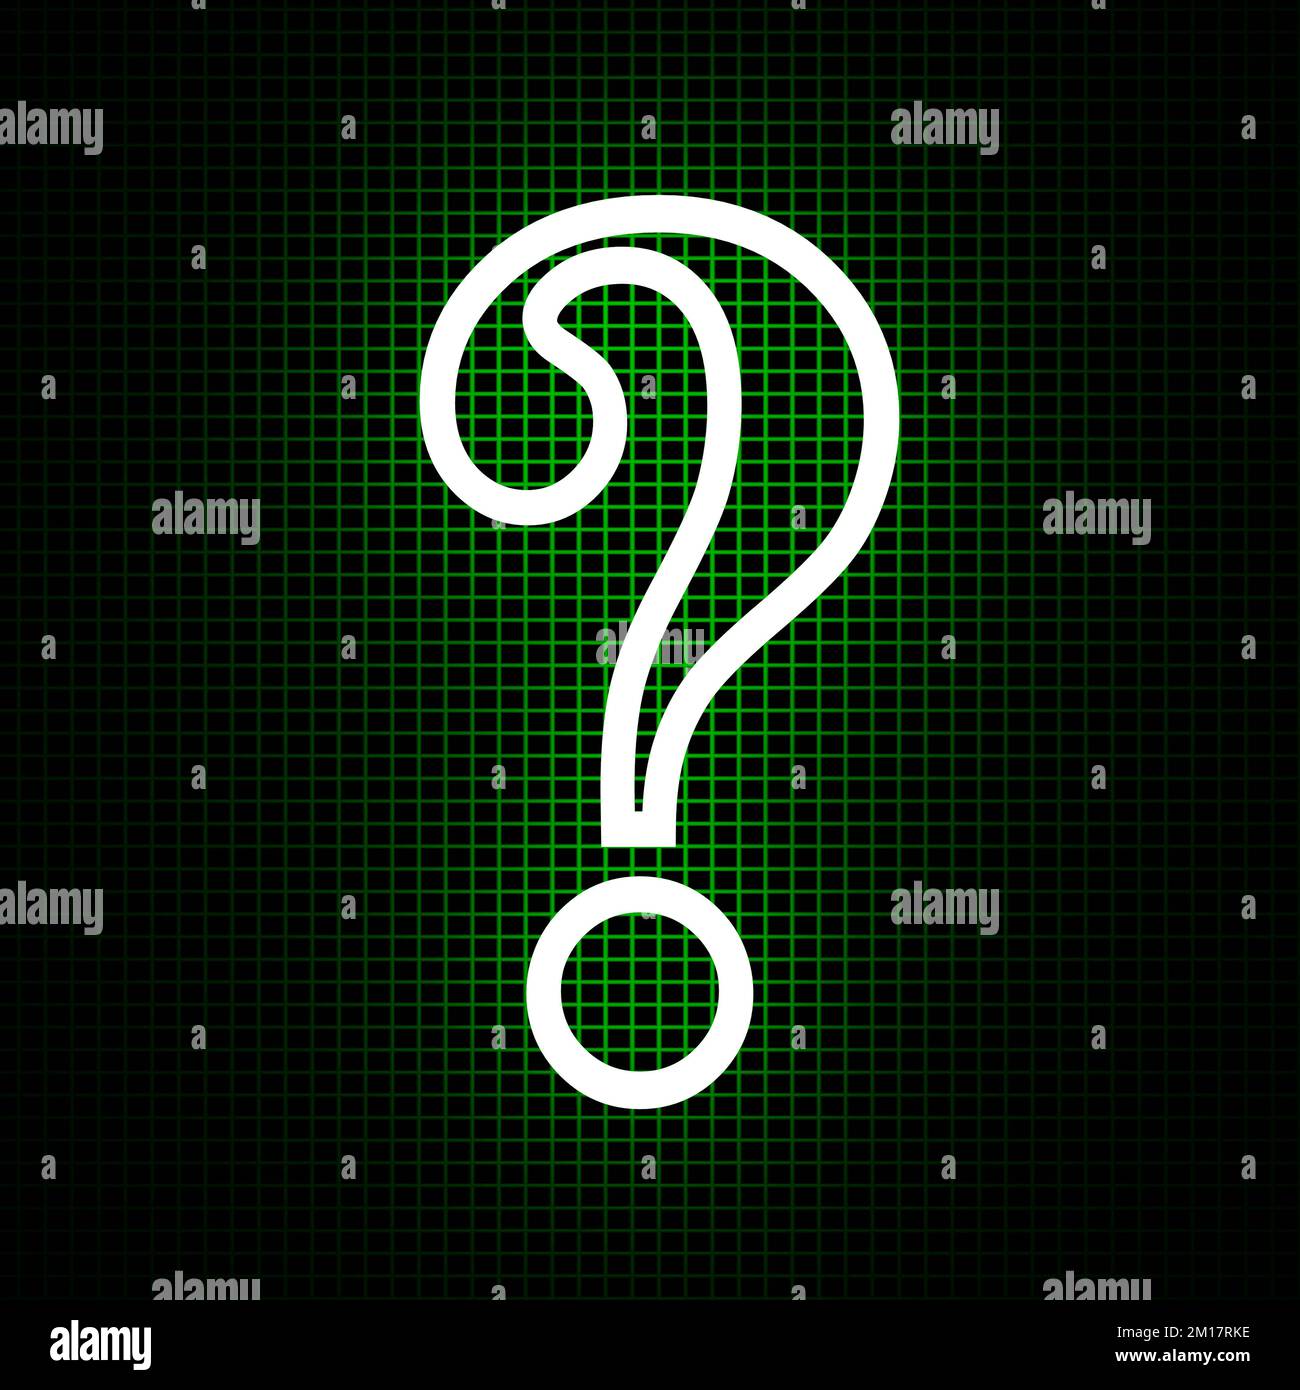 White question mark on green lighted square repeated shape metal neon background. Doubt symbol, solution searching. 3d render Stock Photo